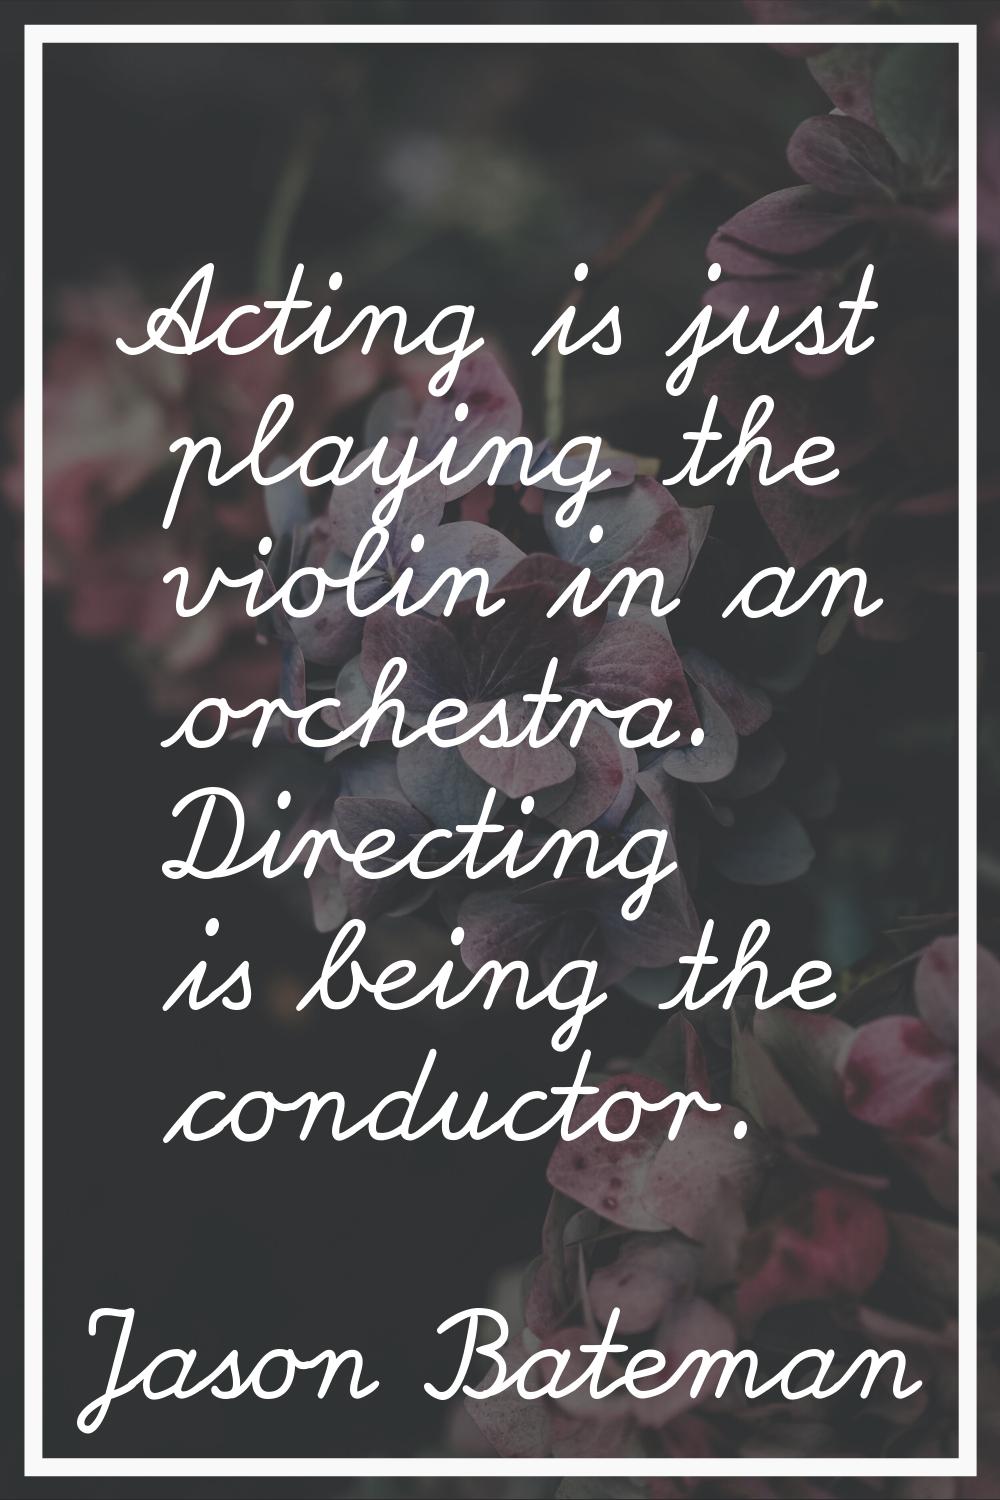 Acting is just playing the violin in an orchestra. Directing is being the conductor.